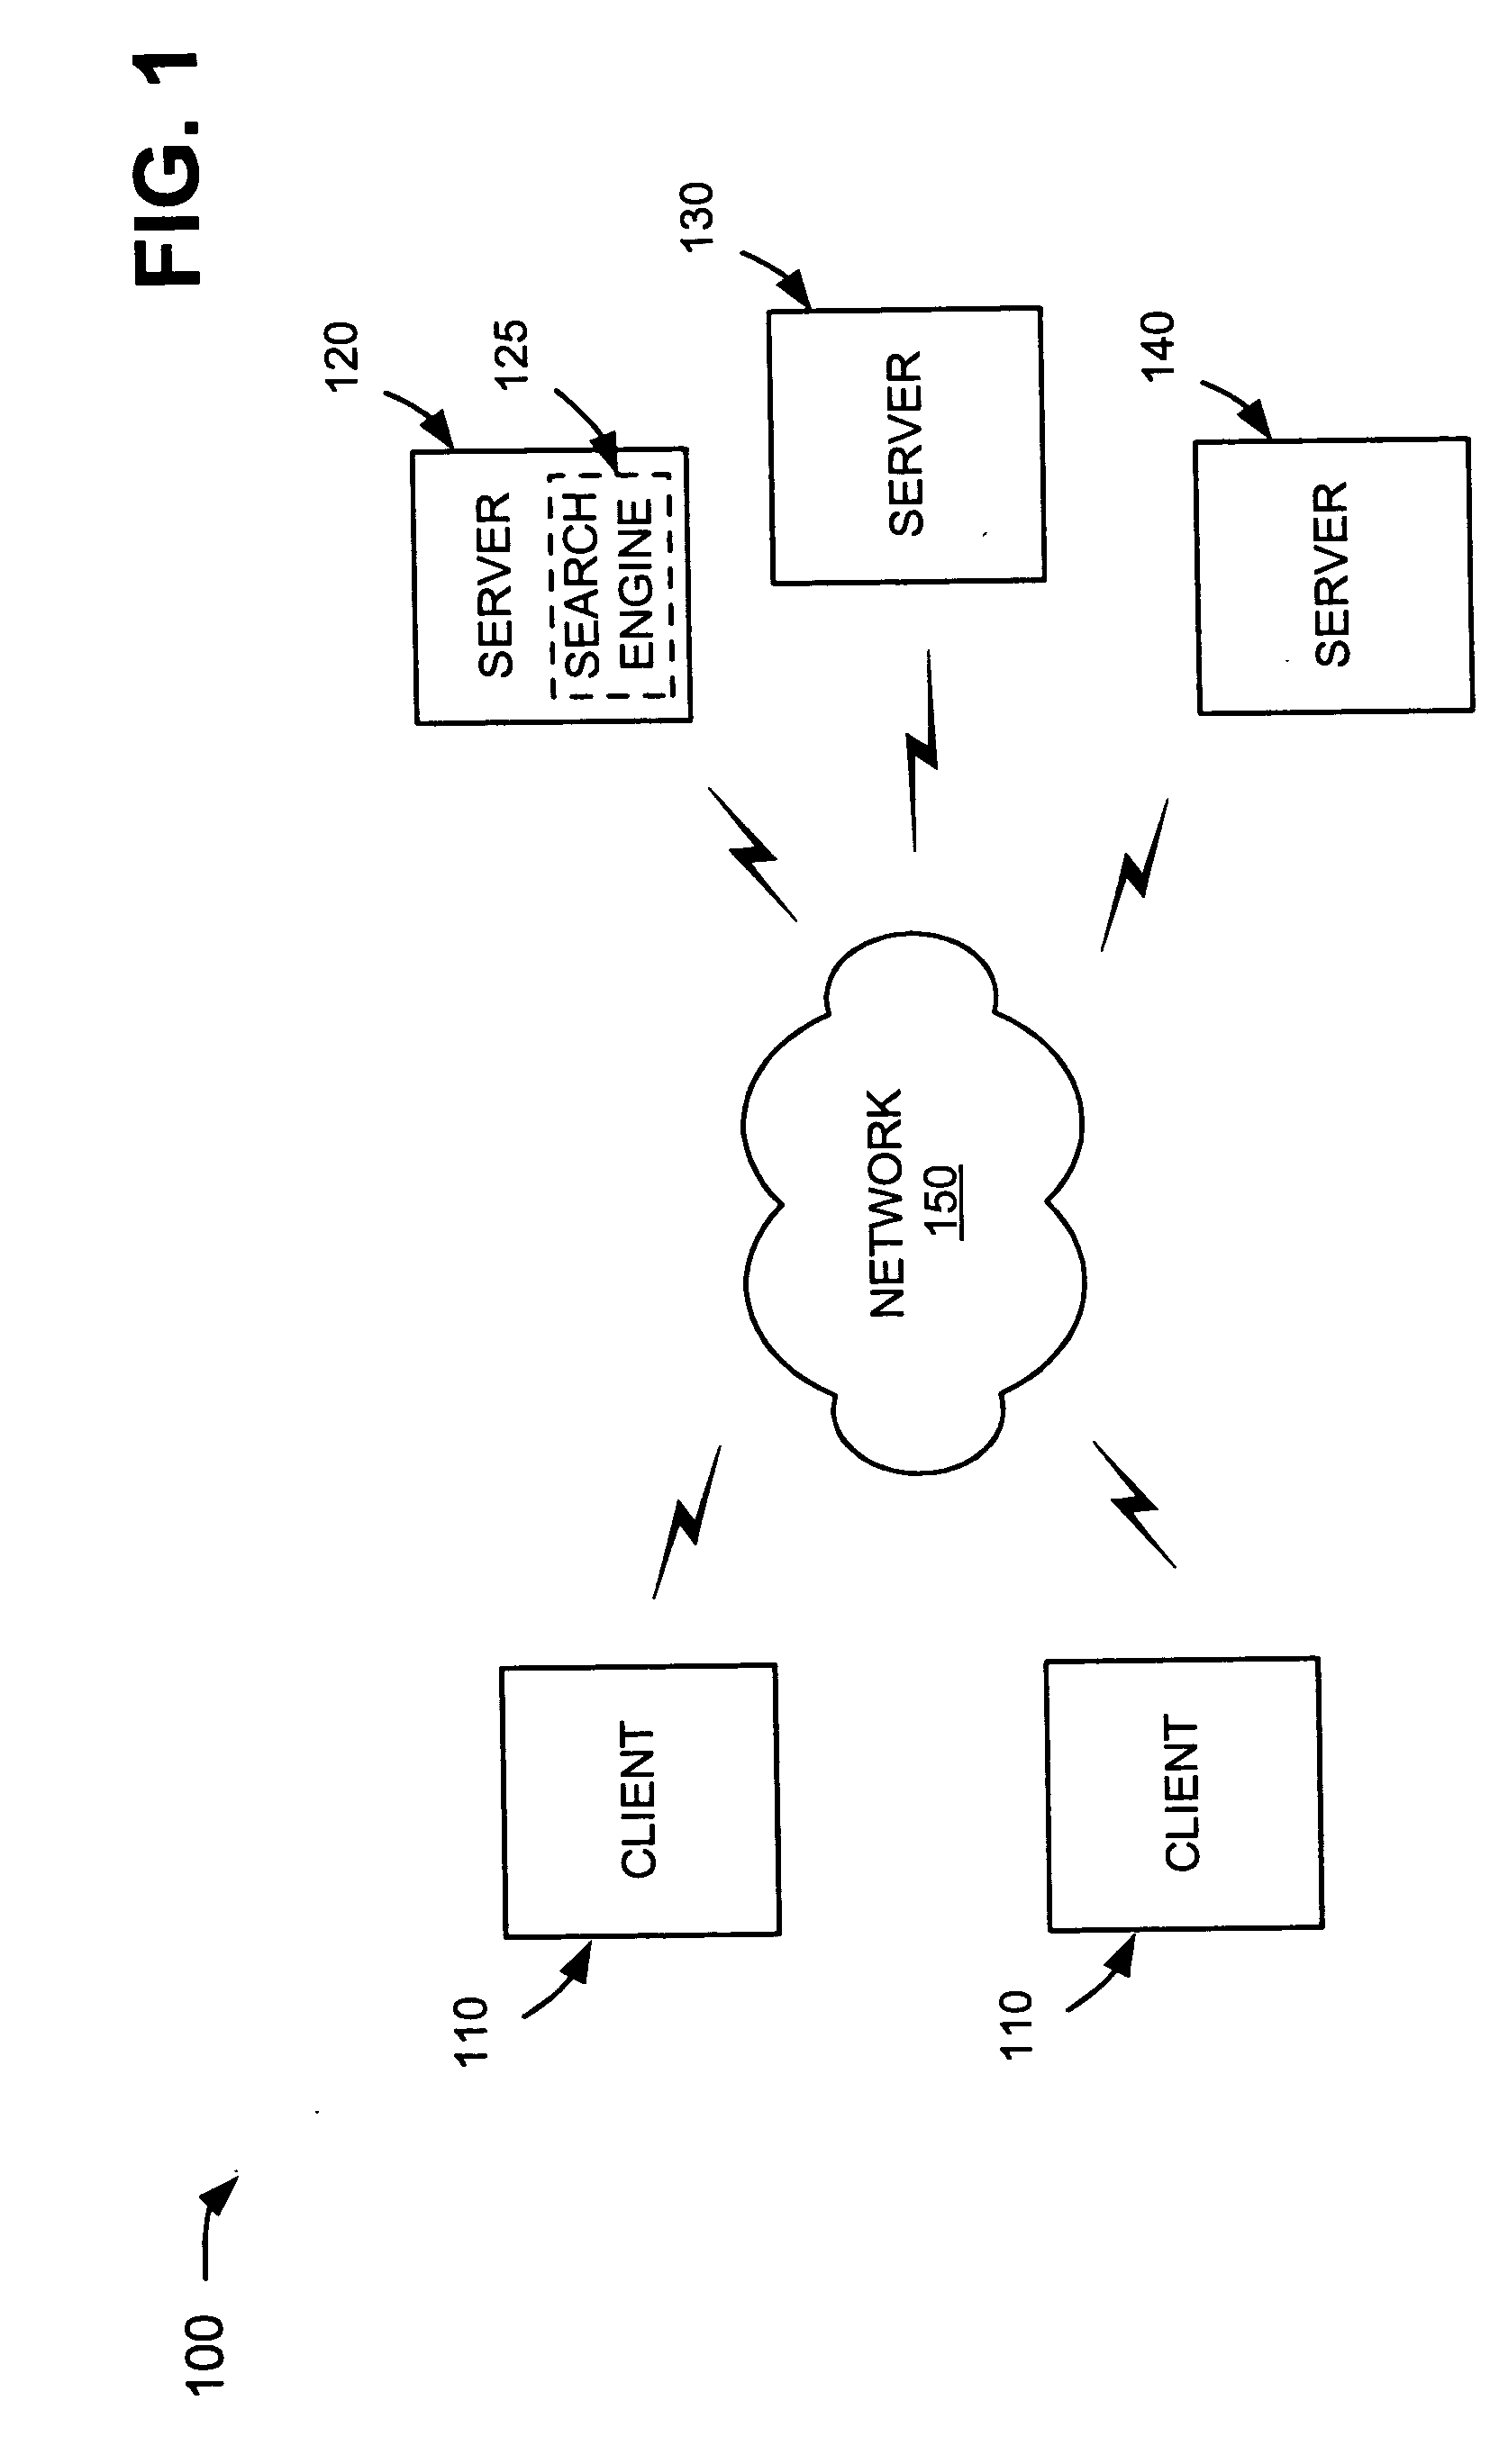 Systems and methods for clustering search results